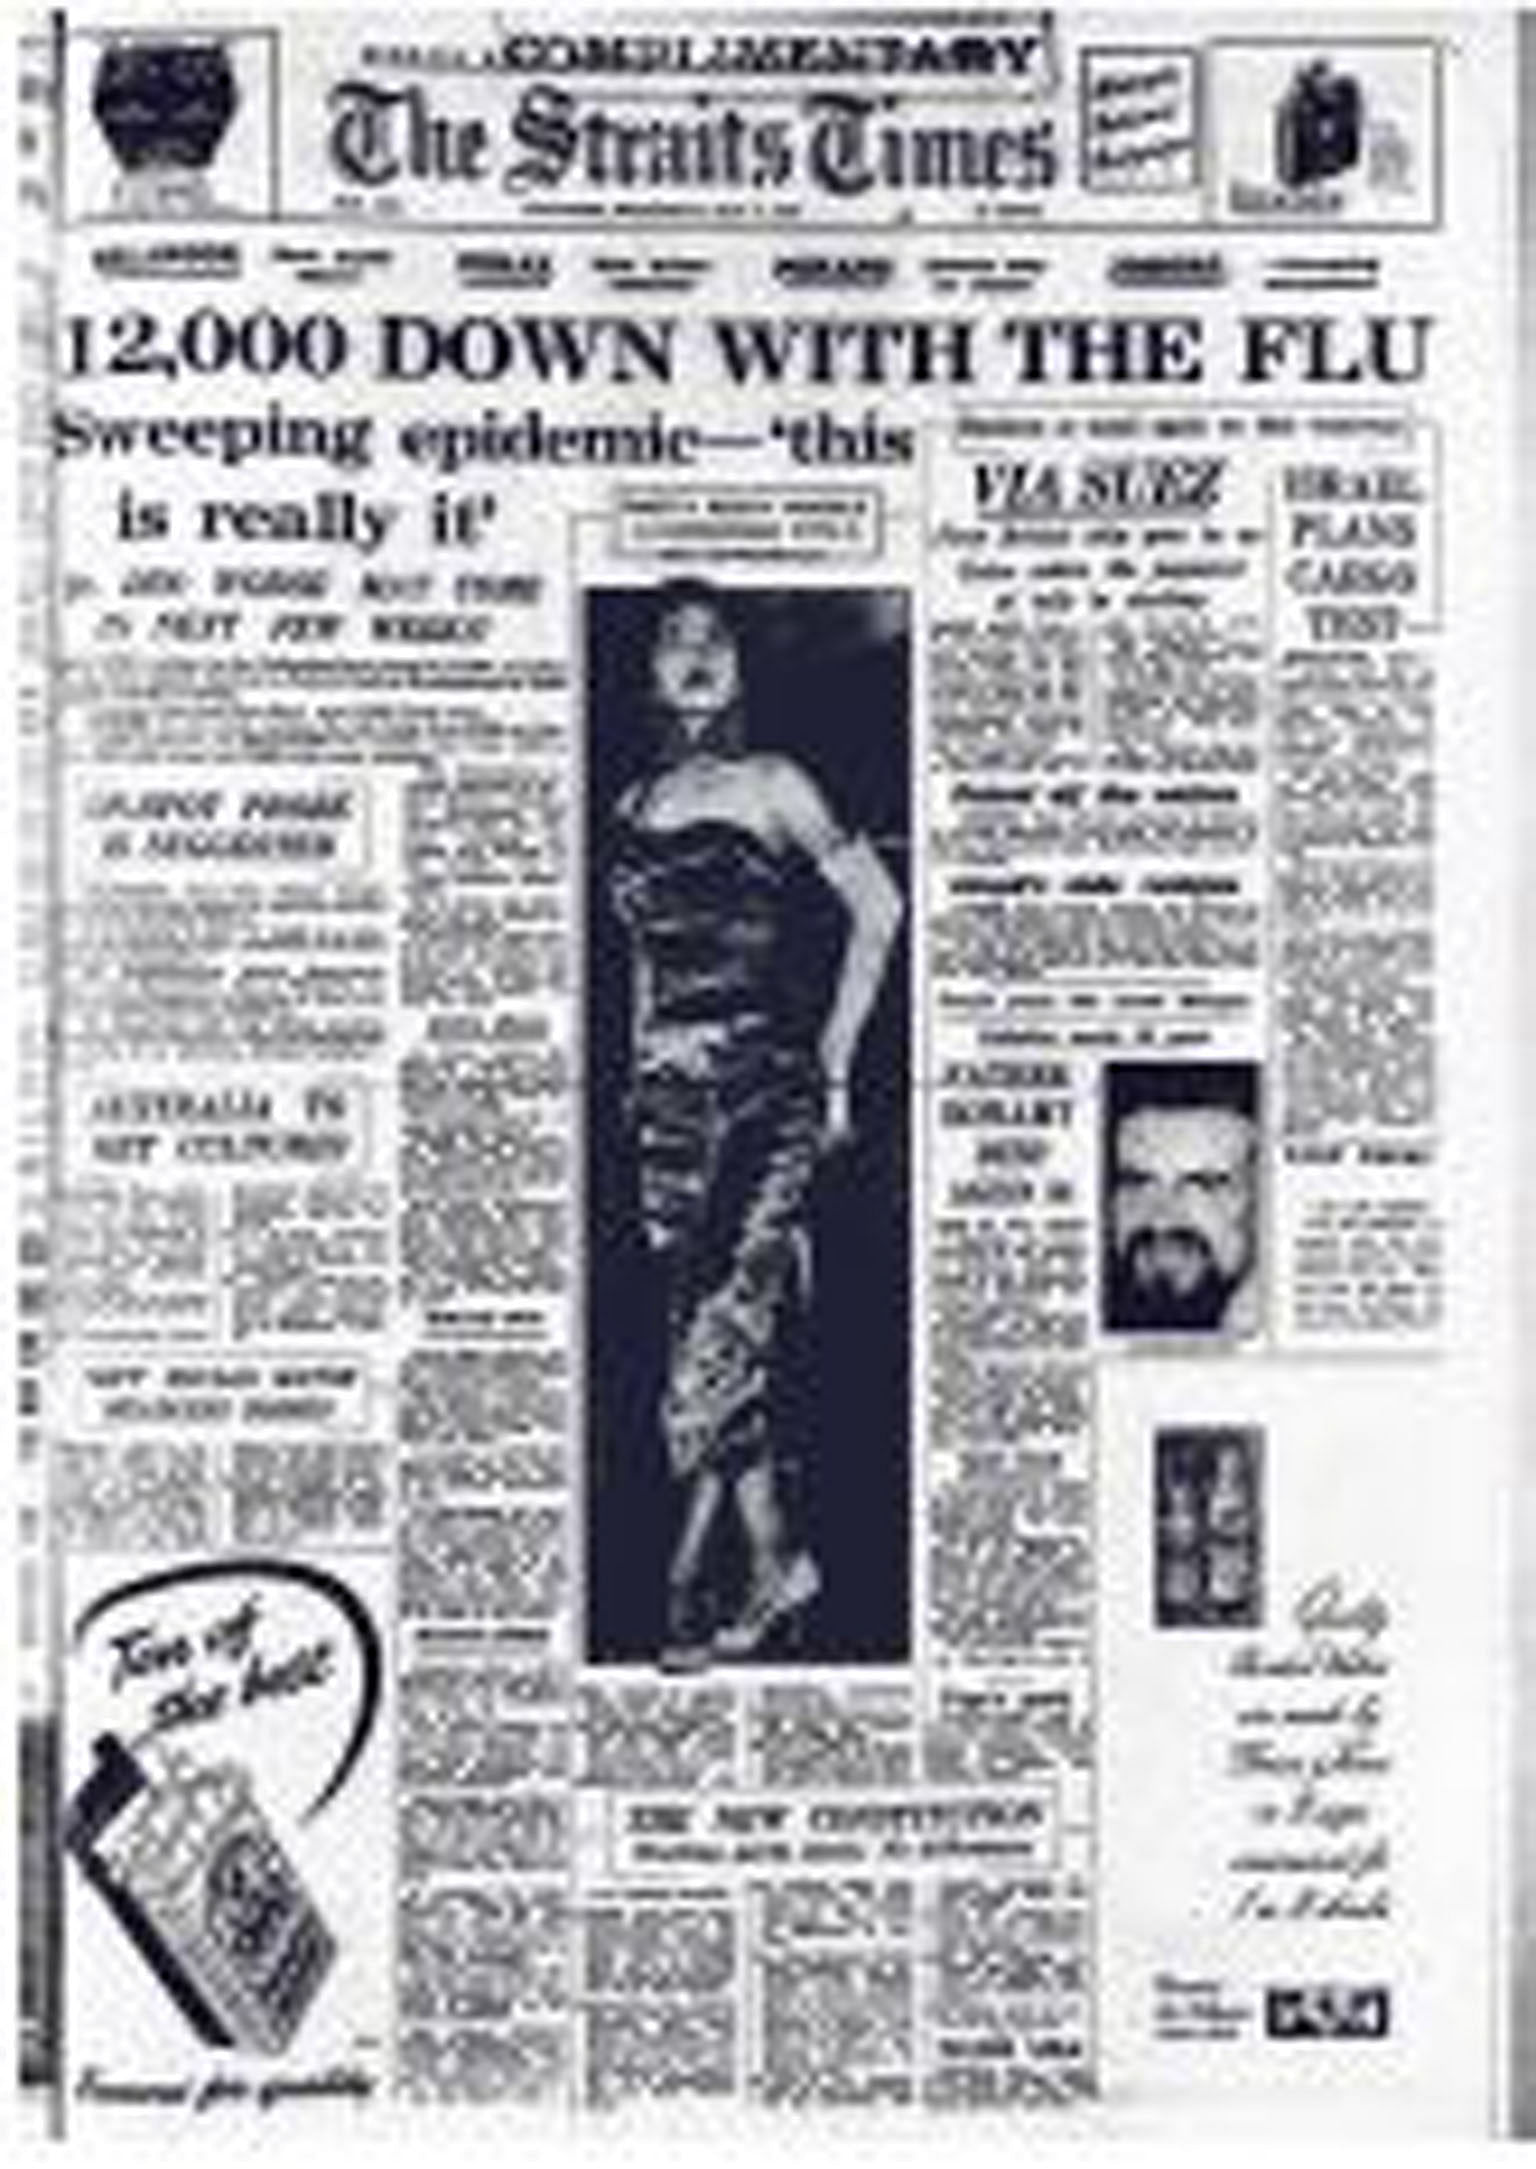 Left: The Straits Times' front page on May 15, 1957, with its story on the flu pandemic. News coverage of outbreaks across a century gives not only historical context but also an insight into the evolution of local media. Top and above: Readers' lett